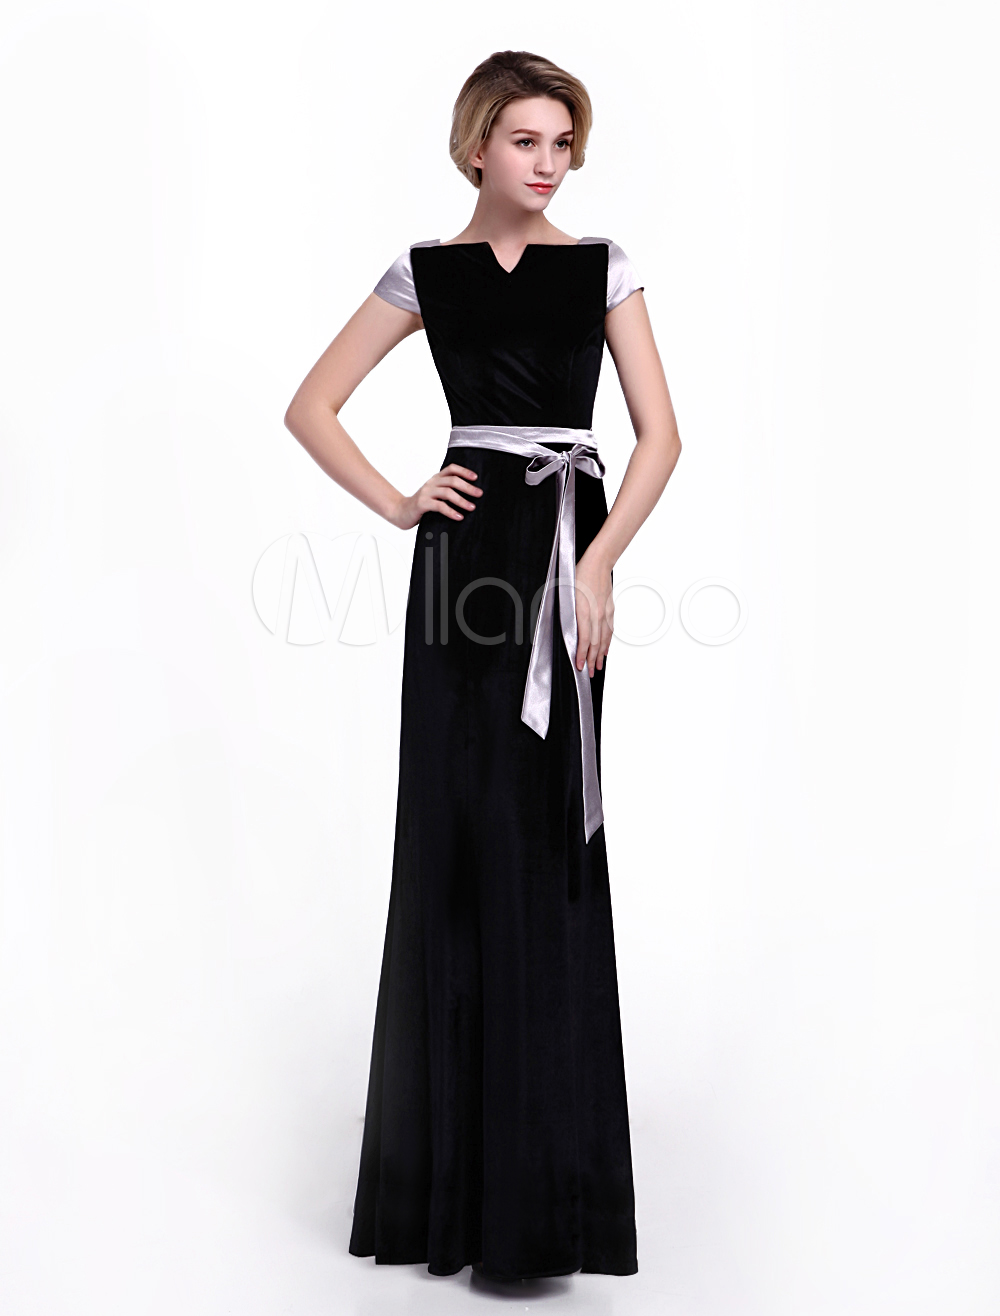 Black Bridal Mother Dress in A-line Notch Silhouette and Collar Knotted Short Sleeves Zipper Velvet Skirt Milanoo (Wedding) photo